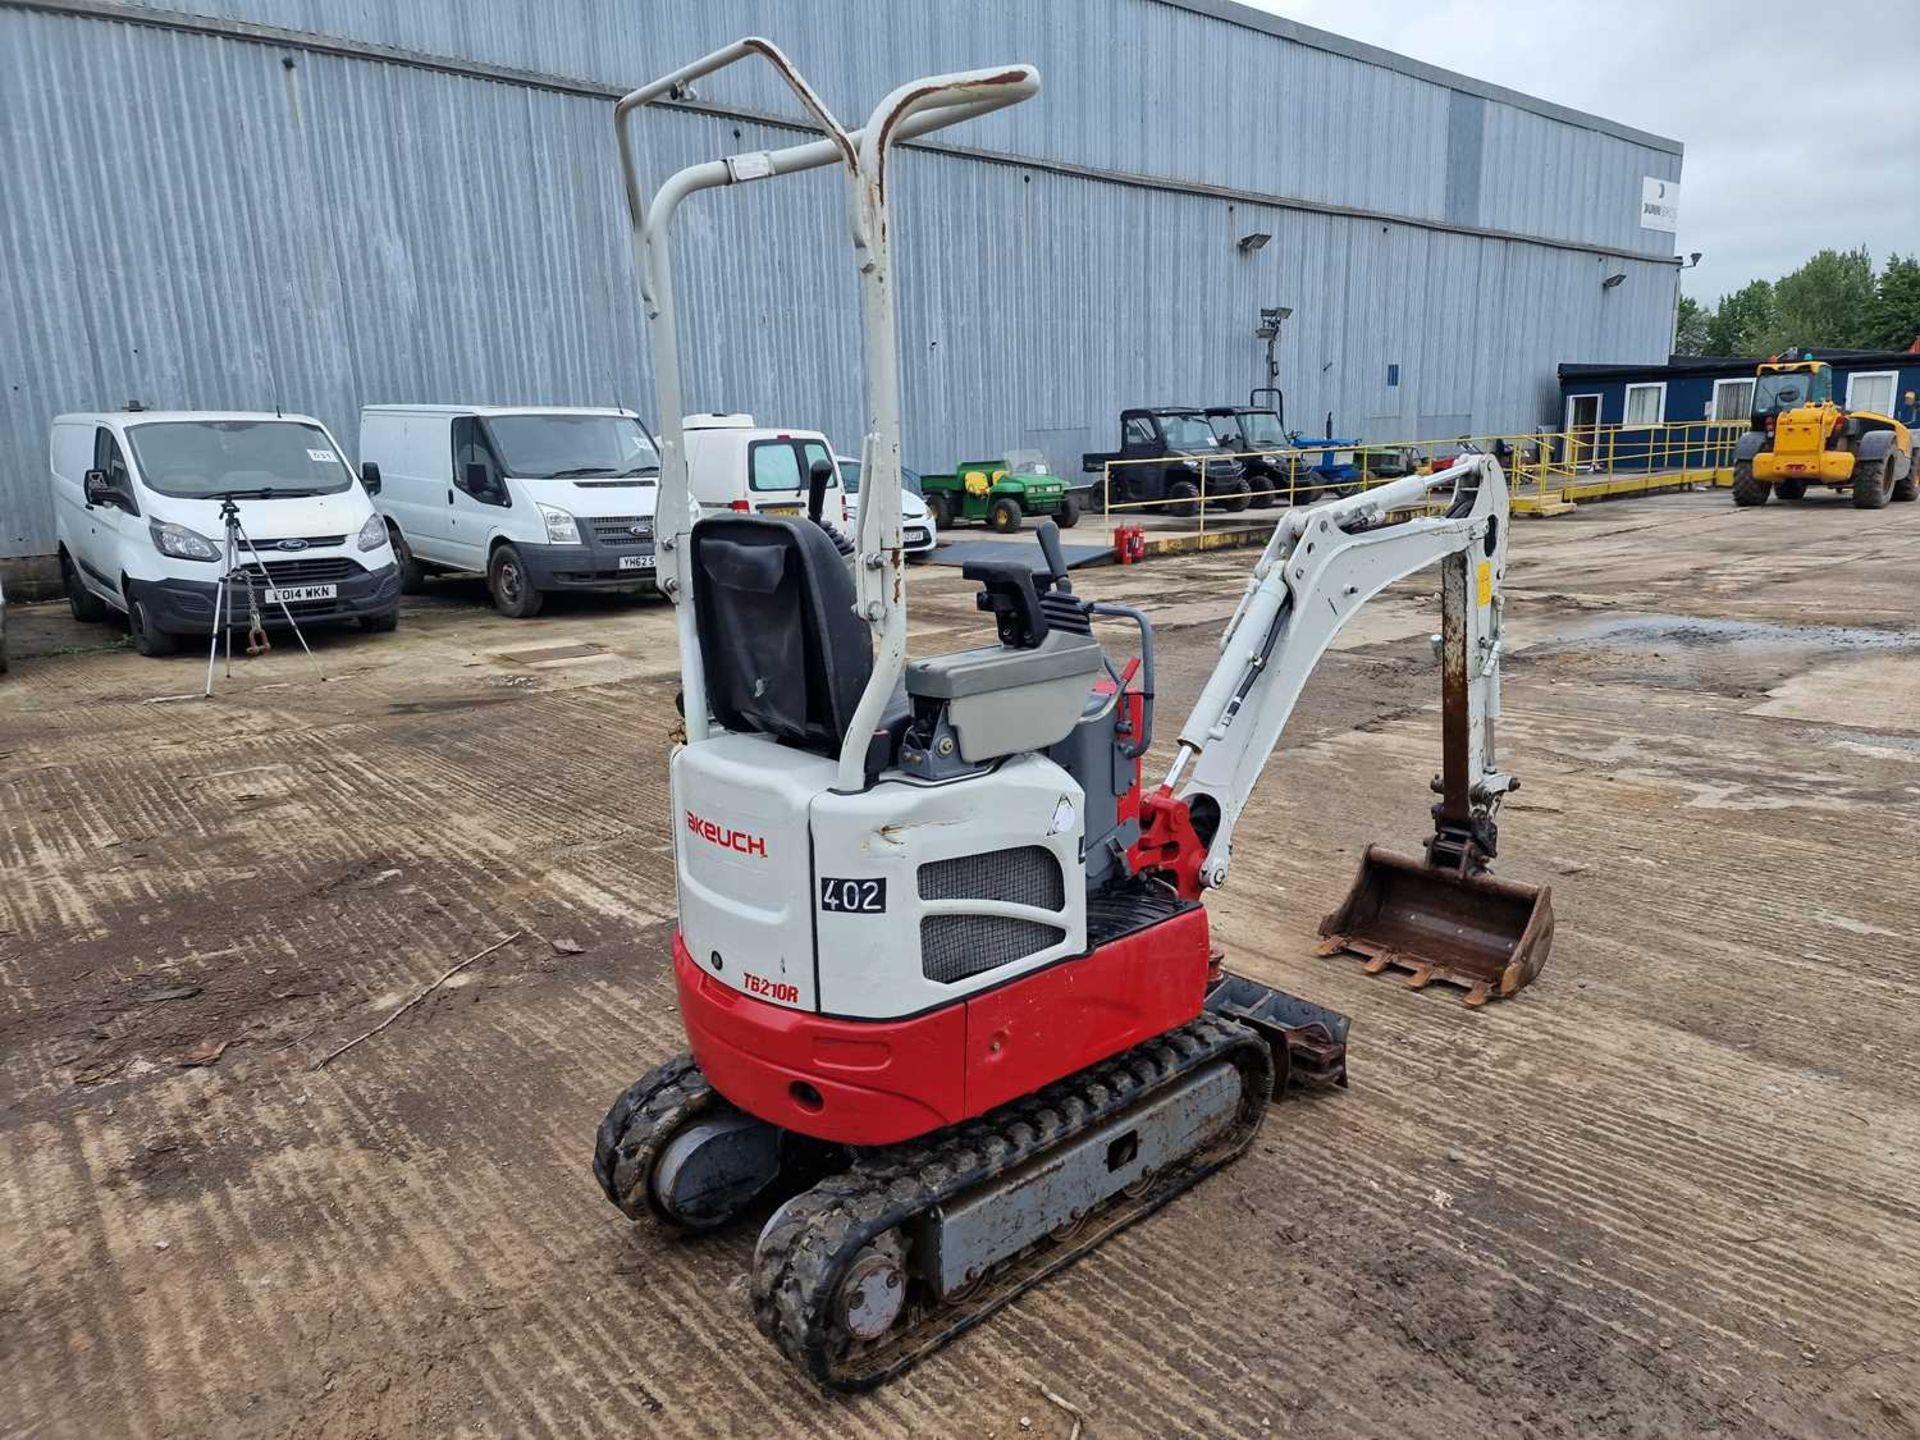 2019 Takeuchi TB210R Rubber Tracks, Blade, Offset, Manual QH, Piped, Expanding Undercarriage, Roll B - Image 69 of 96